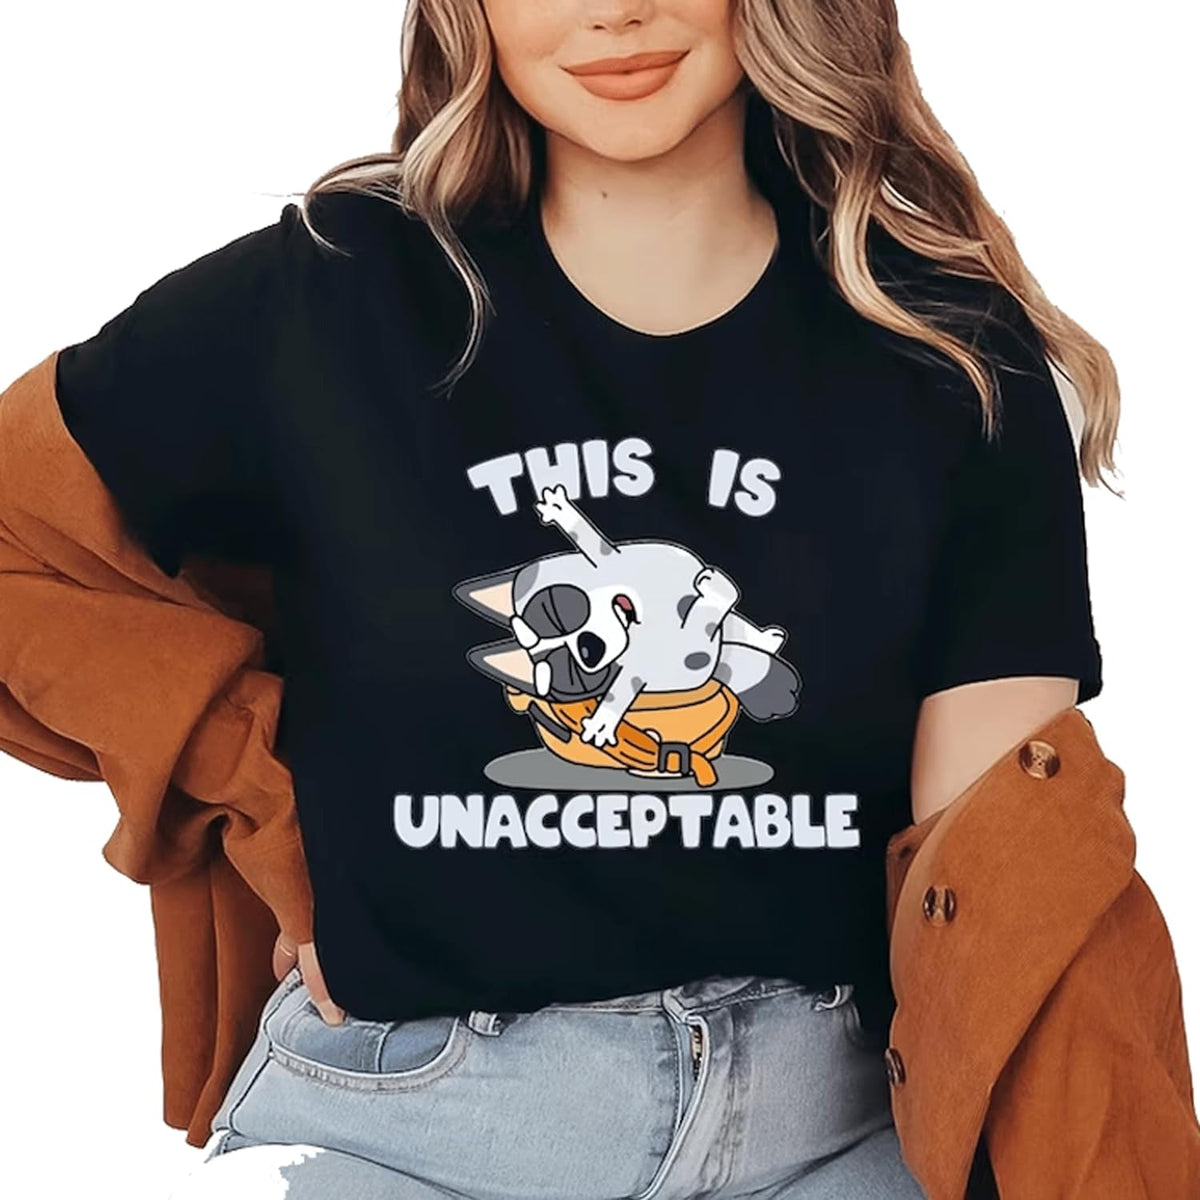 a woman wearing a black shirt that says this is unacceptable